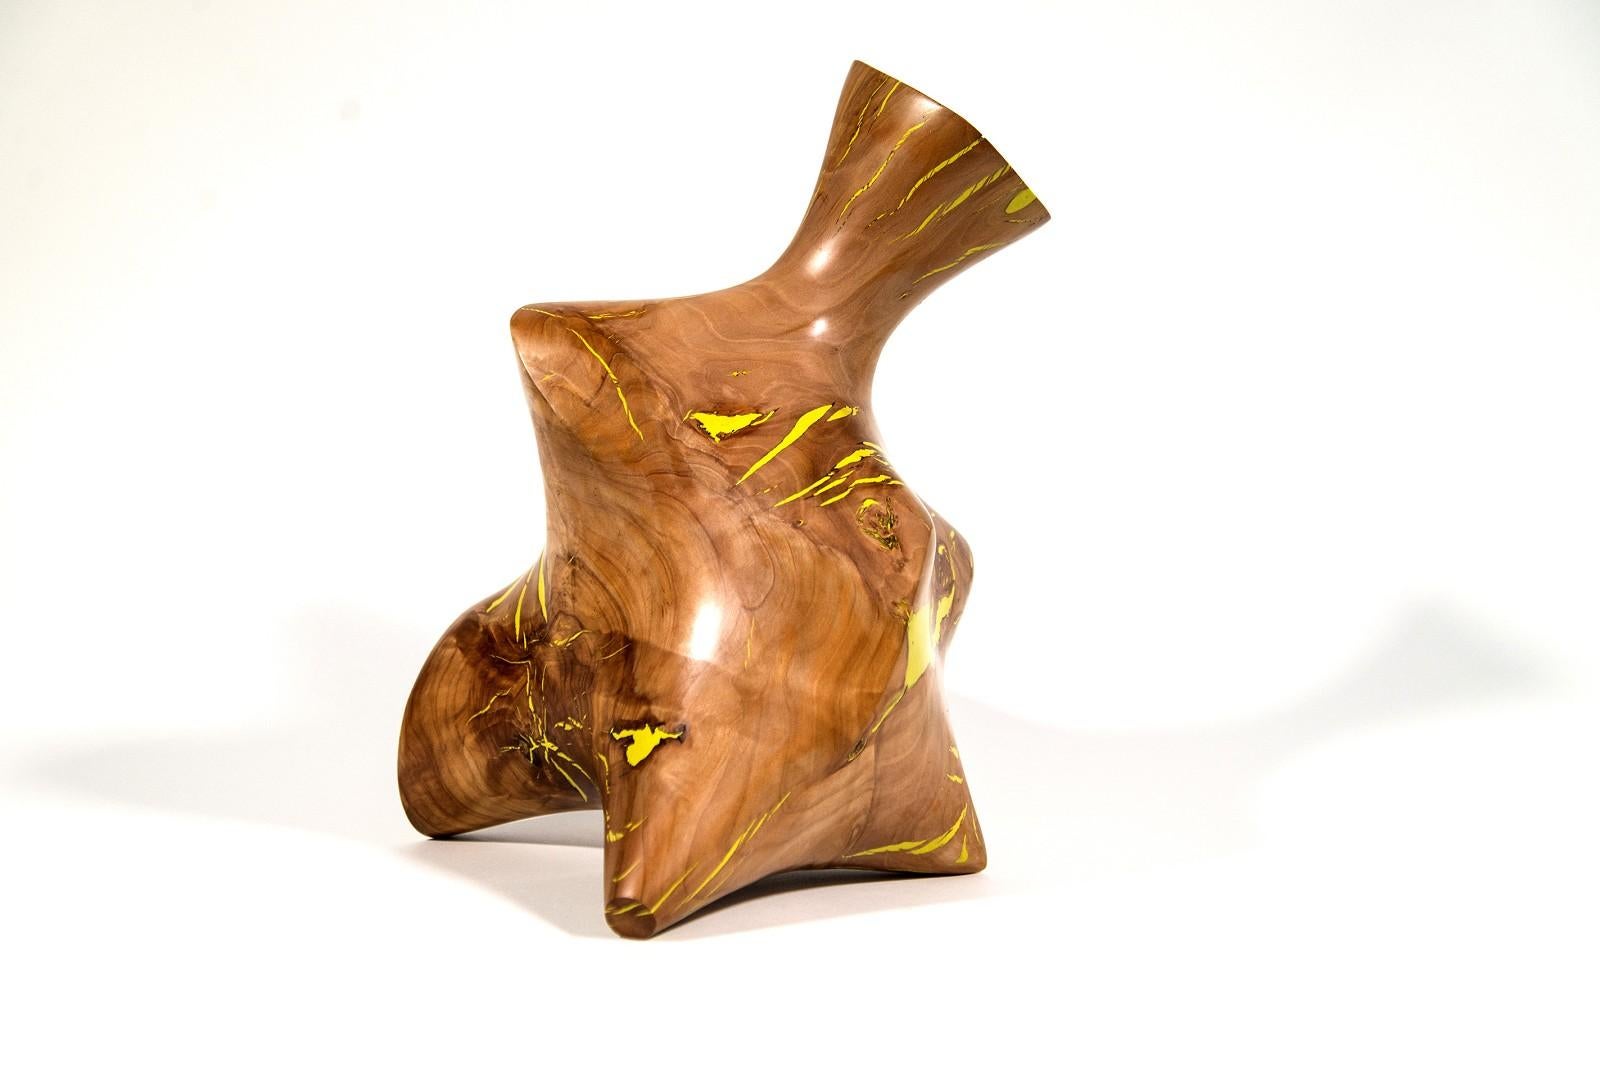 Windfall Series II No 1 - smooth, carved, abstract, Applewood & resin sculpture For Sale 1